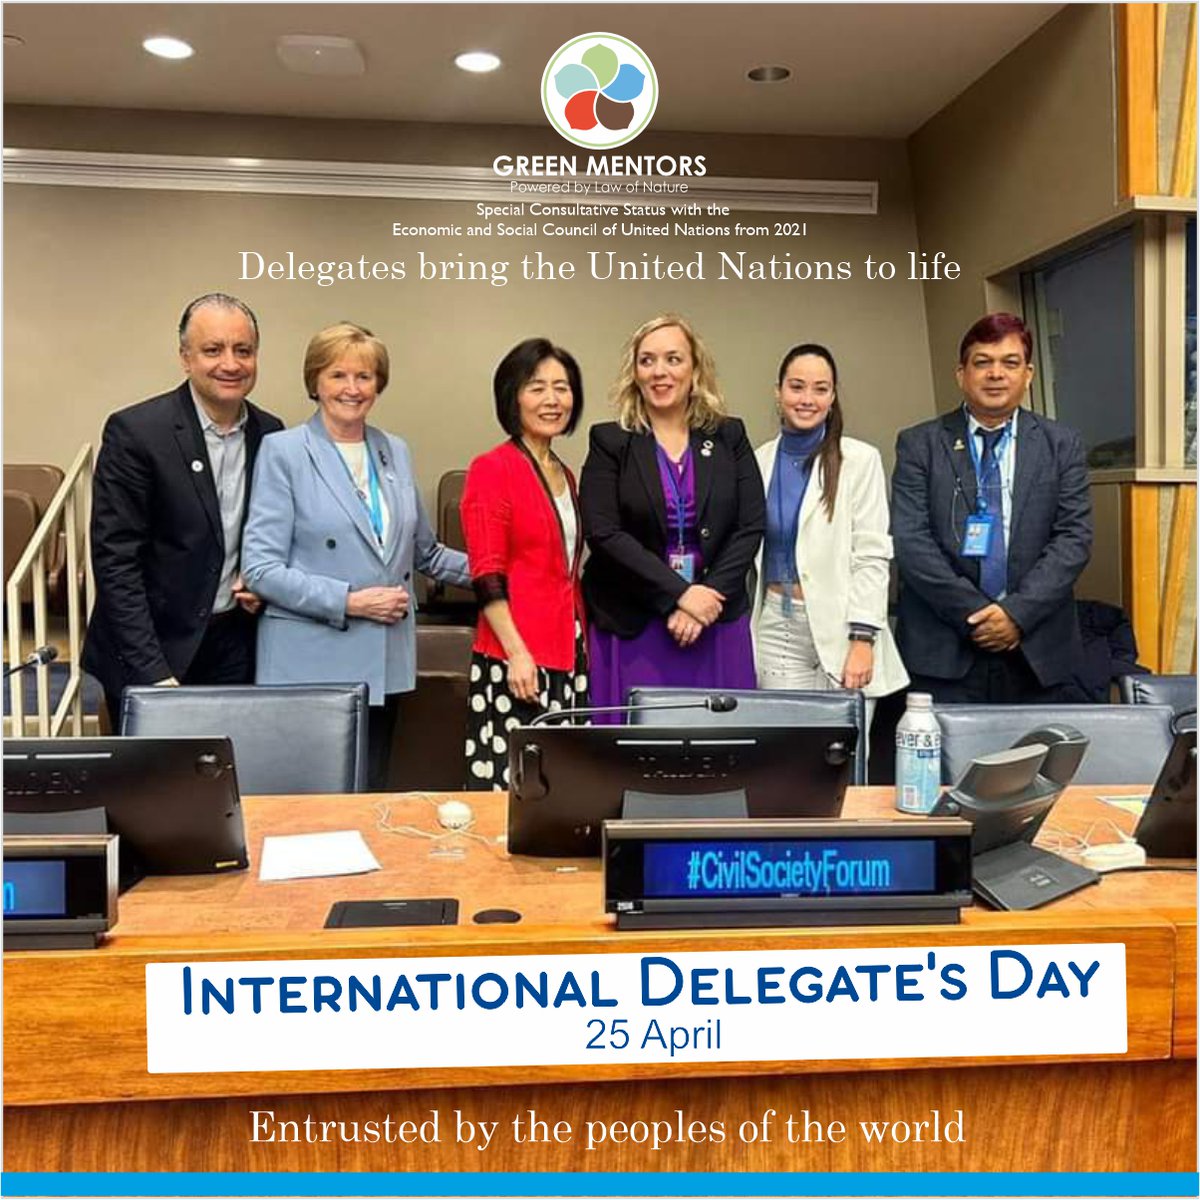 Celebrating International Delegates Day! Today, we honor the dedicated efforts of delegates worldwide who work tirelessly to forge paths toward a sustainable future. 
#DelegatesDay